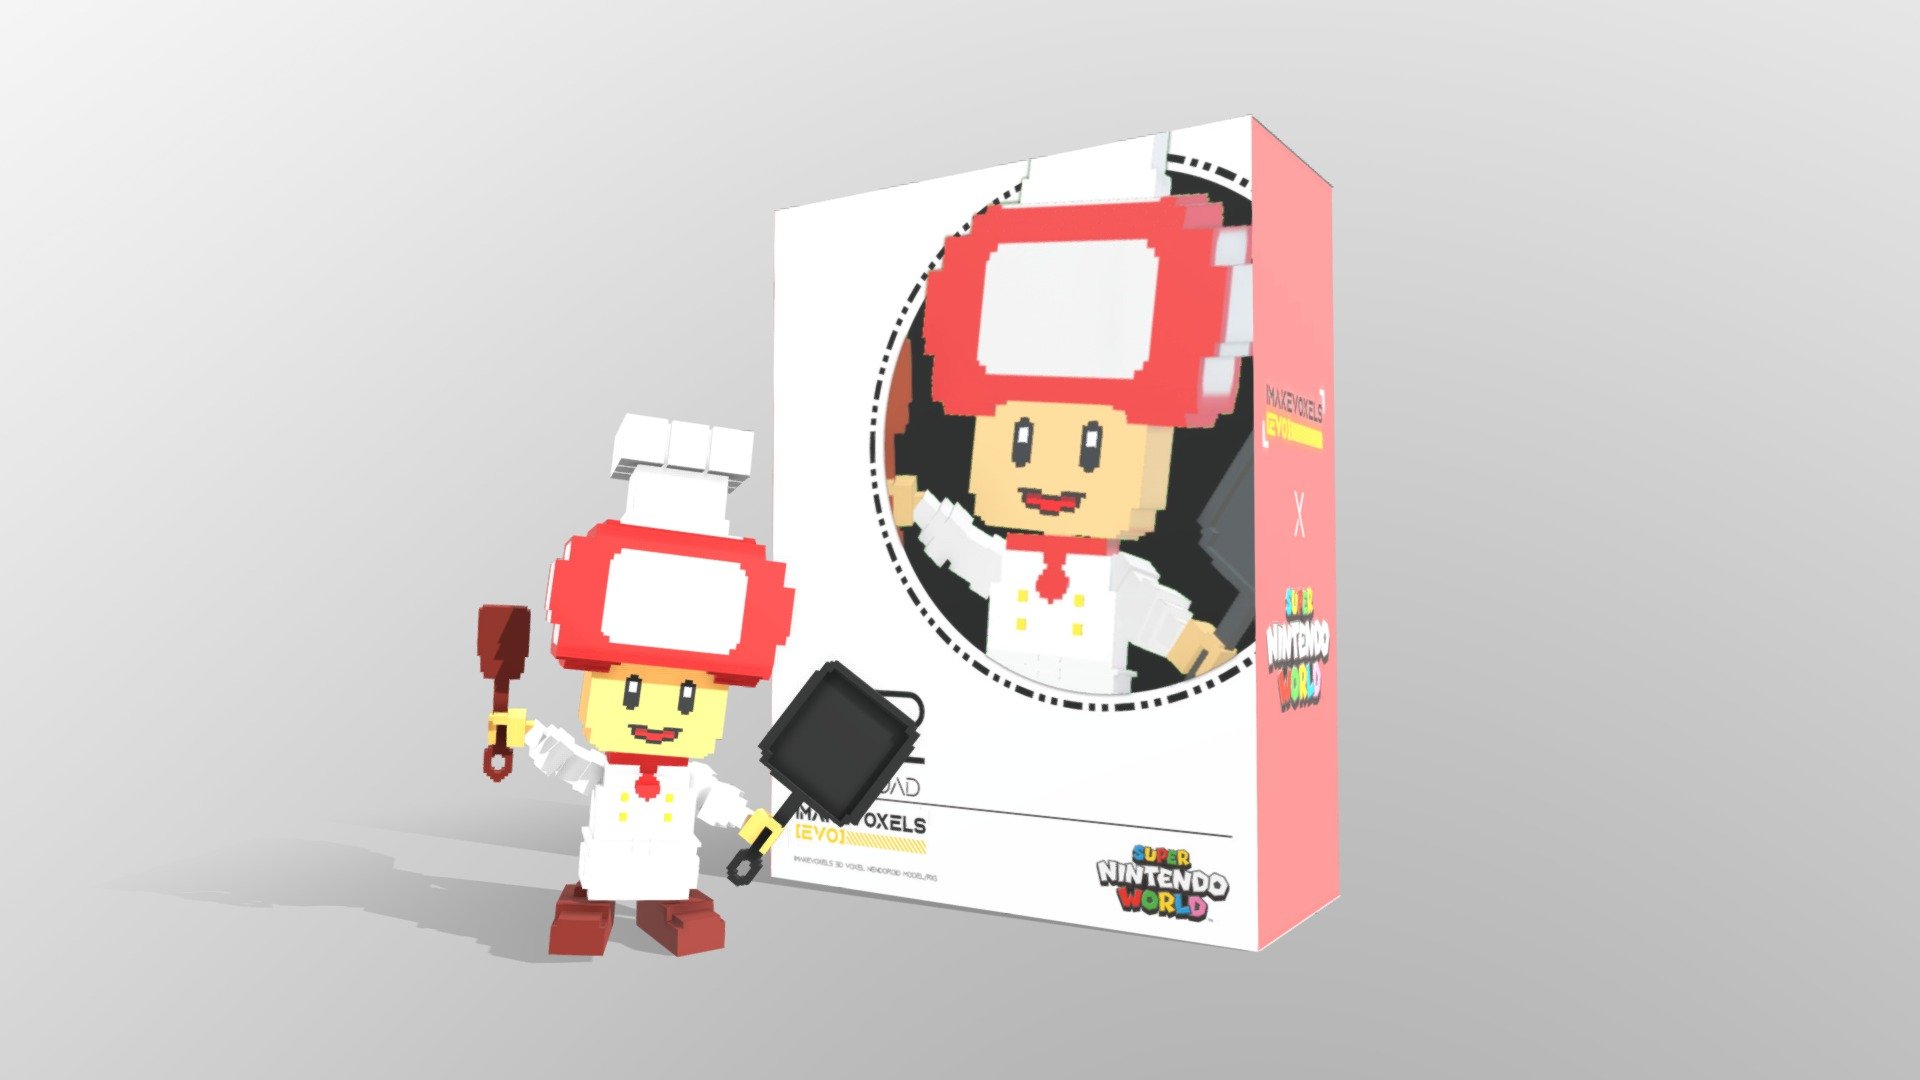 Nendoroid Rig / Model

[Commission Open] Custom Character If you need/want a RigModel in this style hit me up at here

Twitter : https://twitter.com/IMakeVoxels Instagram : https://www.instagram.com/imakevoxels/

Discord : A Guy Eating Noodles Forever#8964 - Voxel Nendoroid - Chef Toad - Buy Royalty Free 3D model by IMakeVoxels (@faruqjafni) 3d model